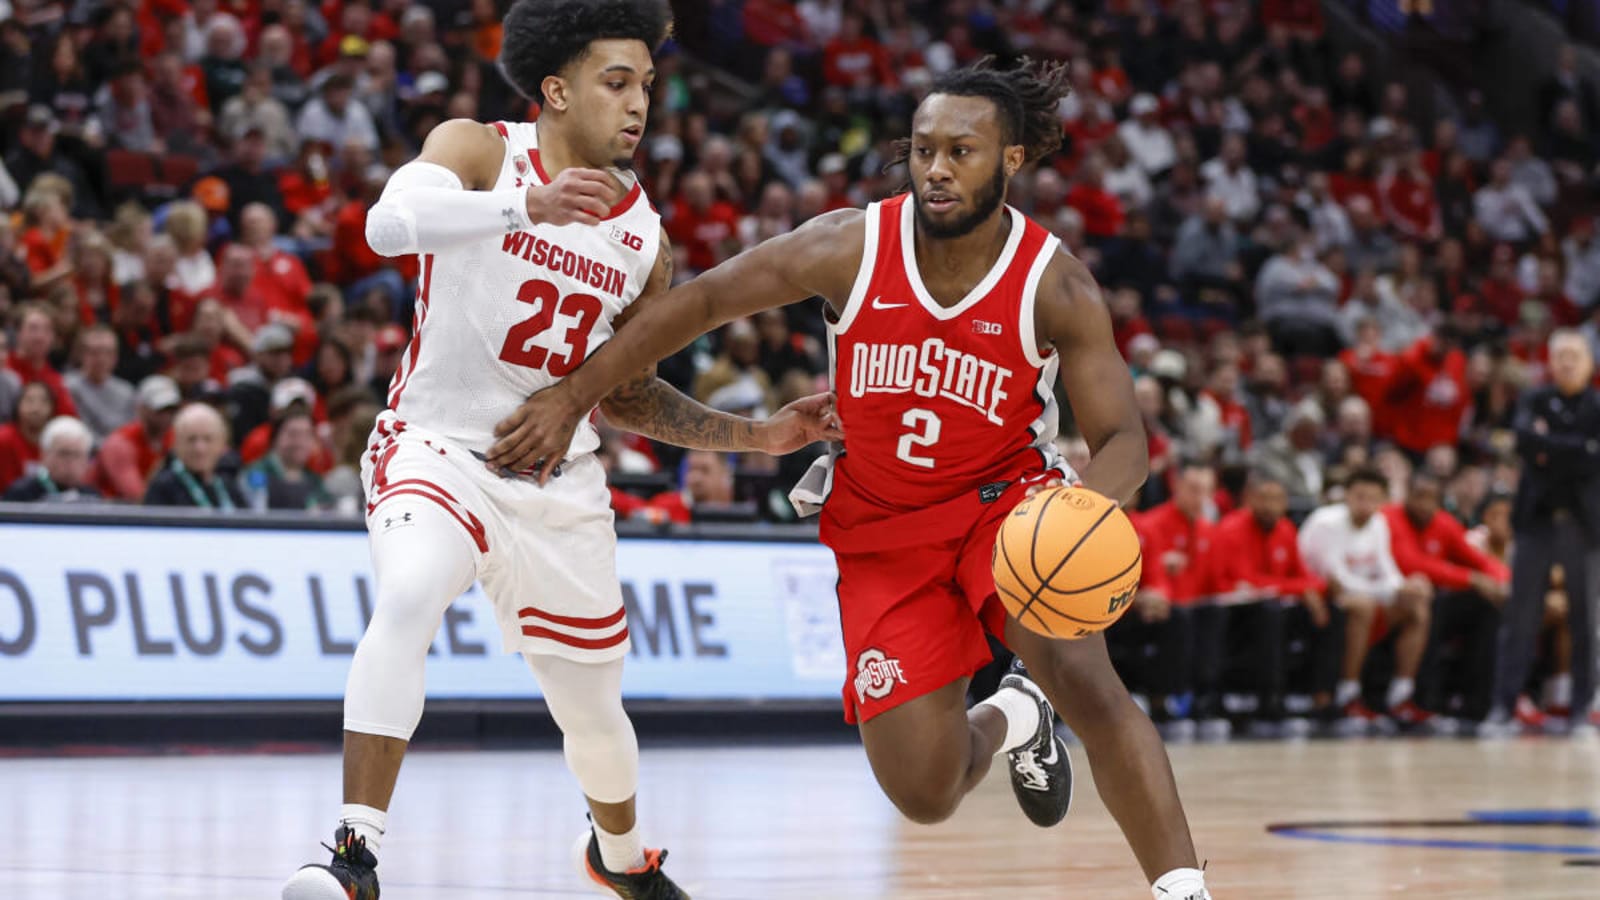 Ohio State Falls to Wisconsin Behind Late-Game Heroics from Max Klesmit